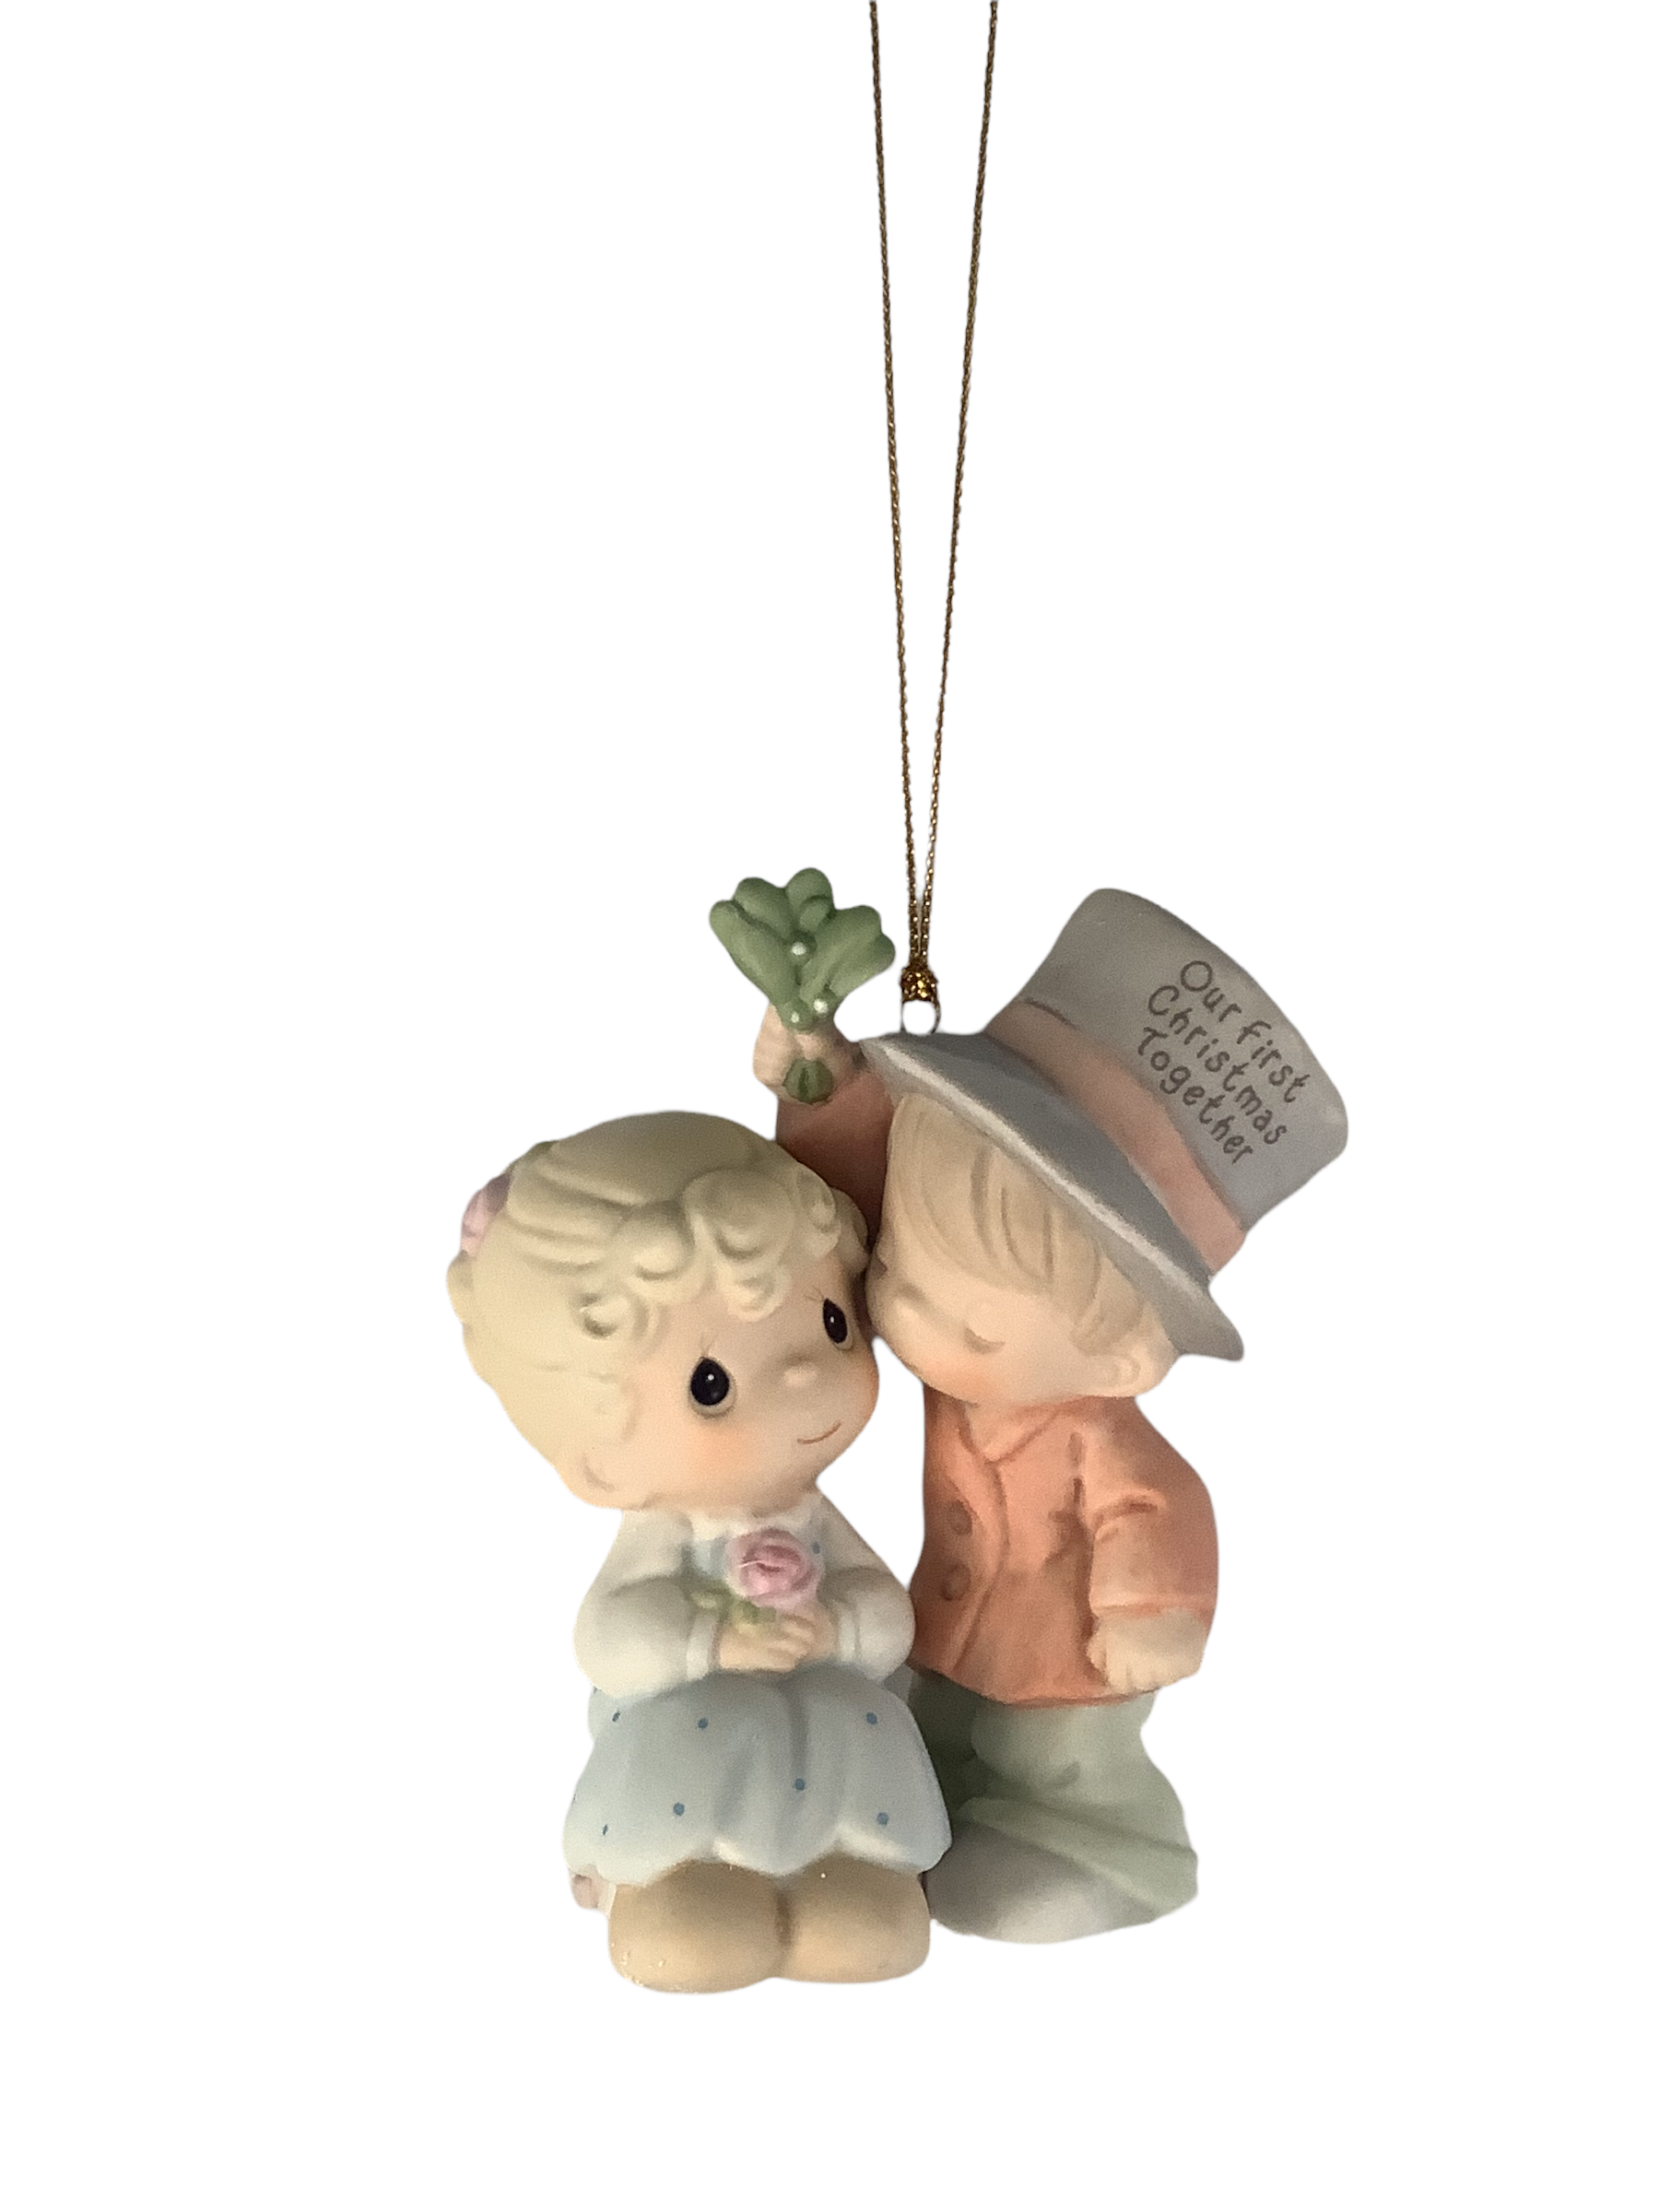 Our First Christmas Together 2001 - Precius Moment Ornament